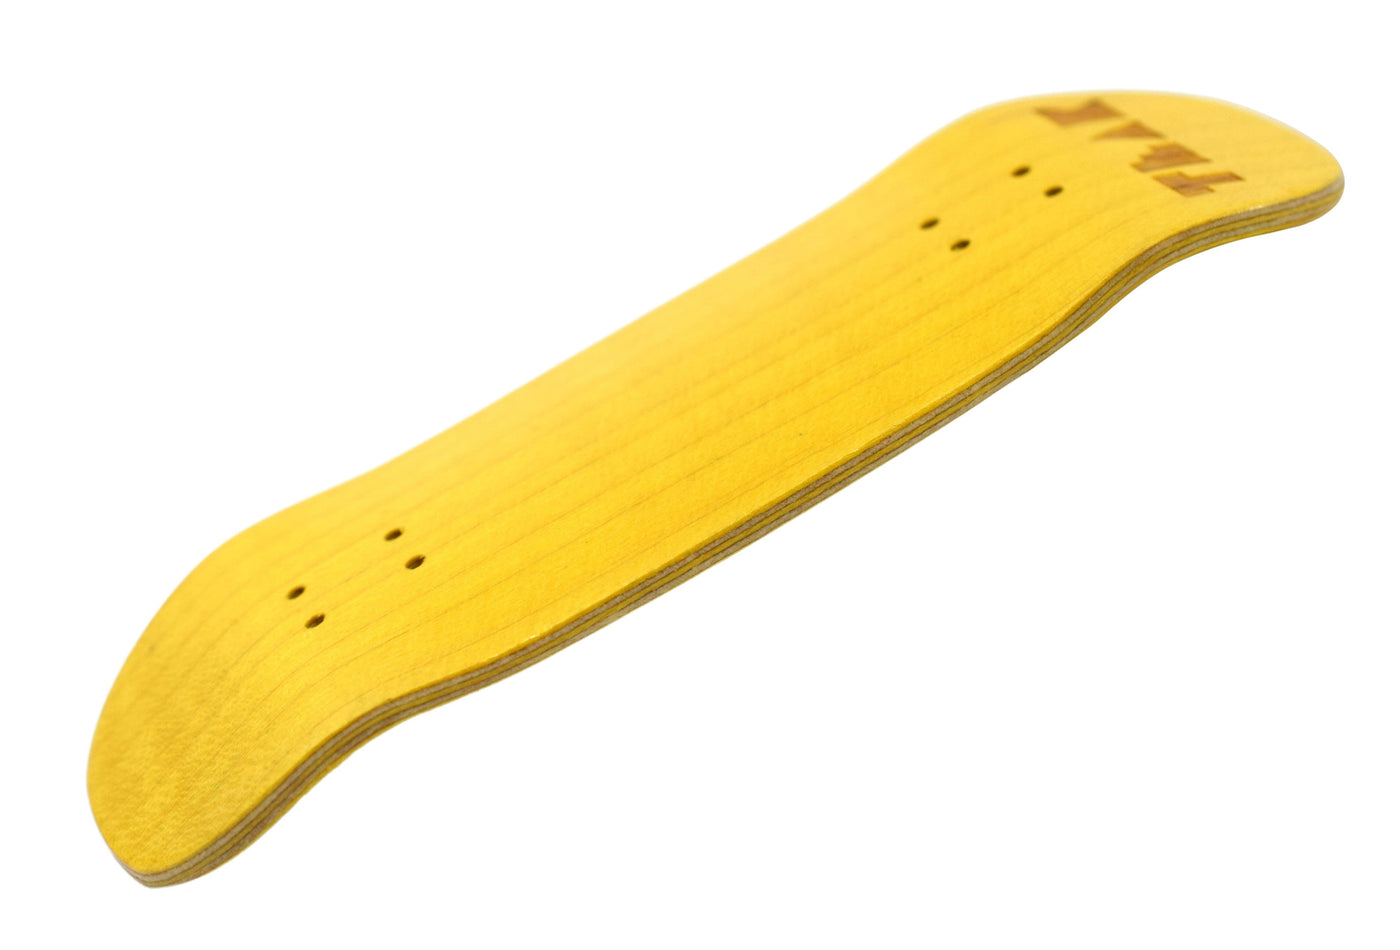 Teak Tuning PROlific Wooden 5 Ply Fingerboard Boxy Deck 32x96mm - Banana Yellow - with Color Matching Mid Ply